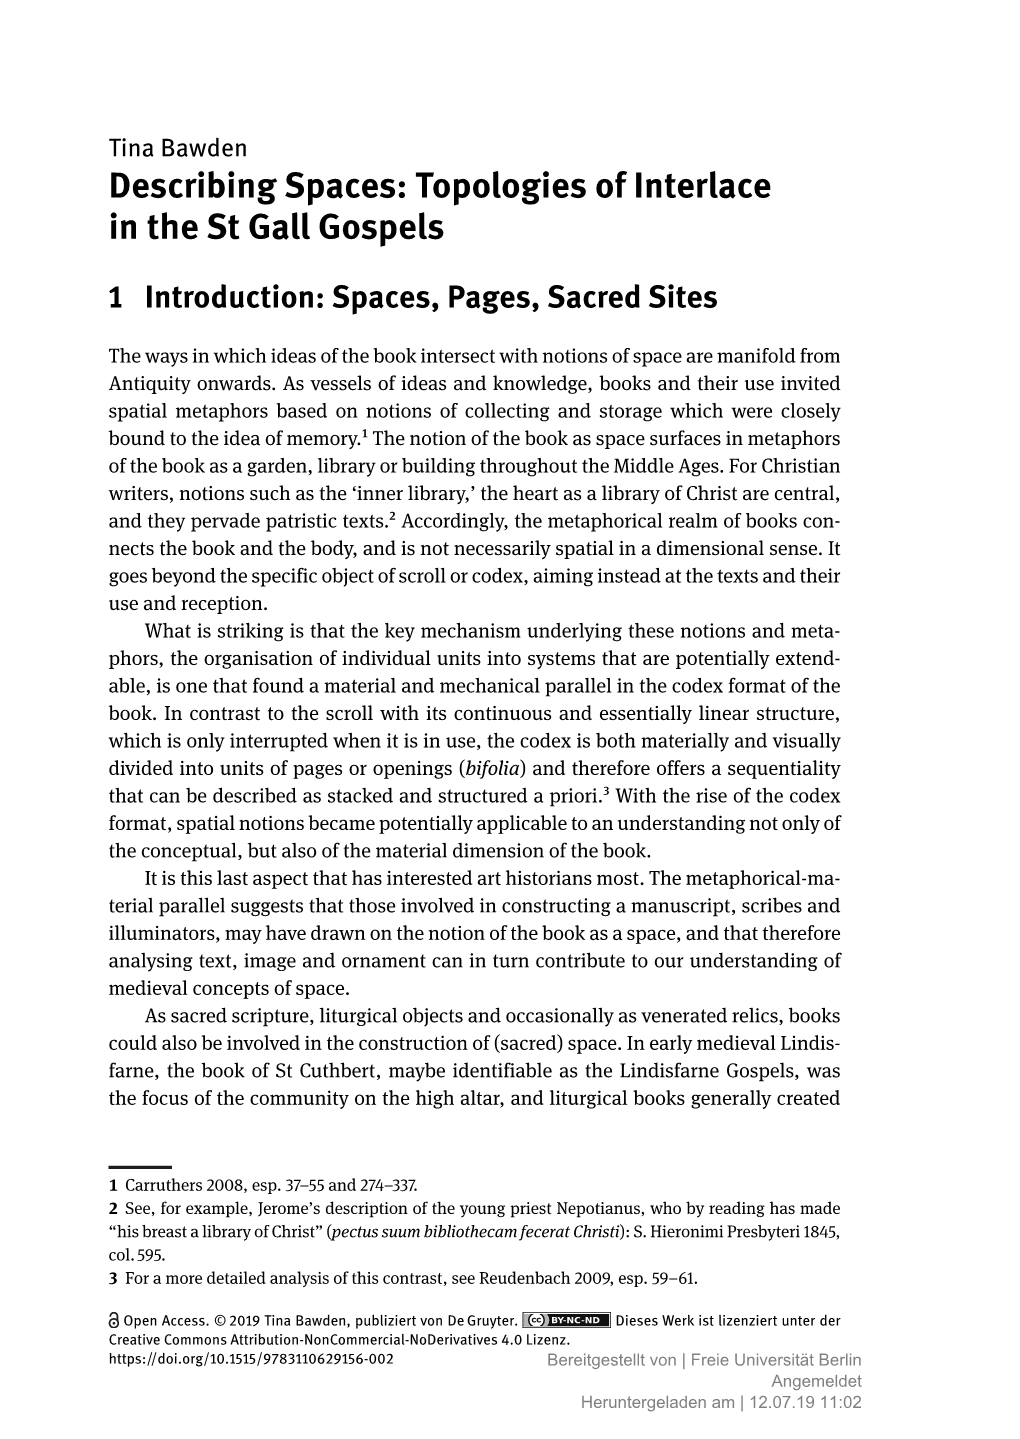 Describing Spaces: Topologies of Interlace in the St Gall Gospels